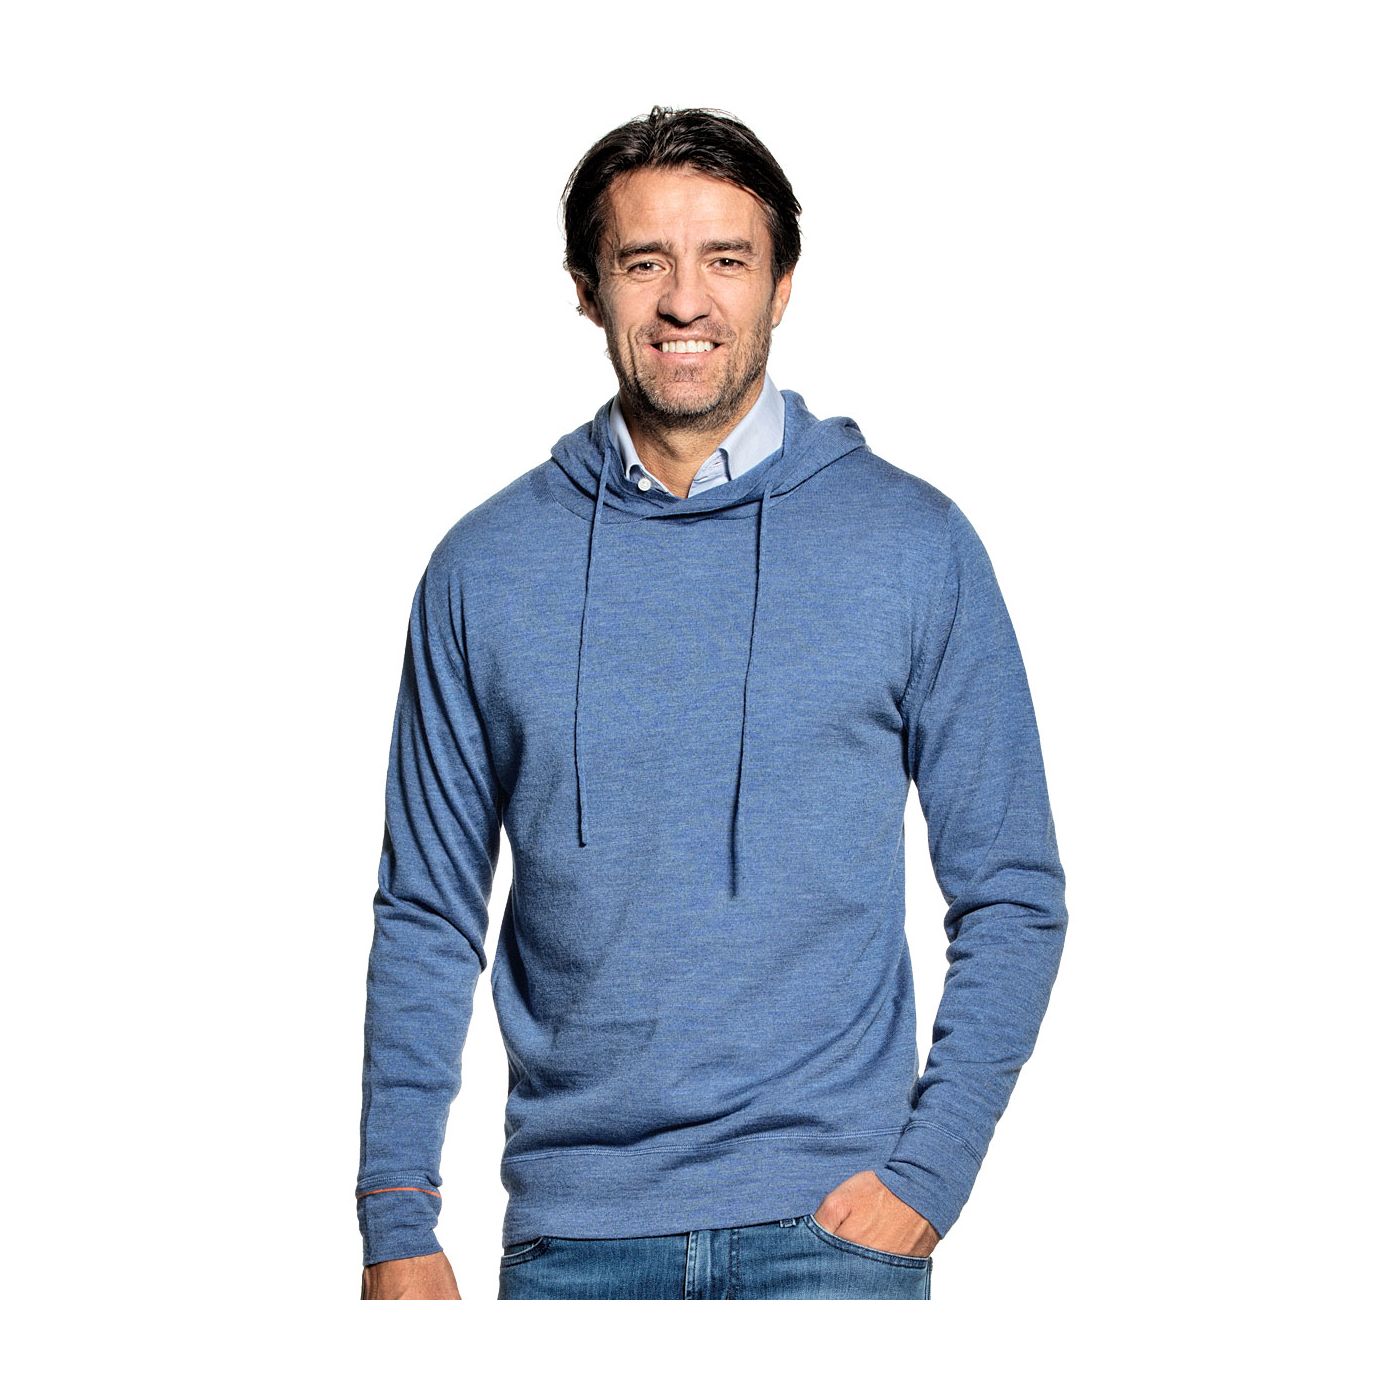 Sweater with hoodie for men made of Merino wool in Bright blue